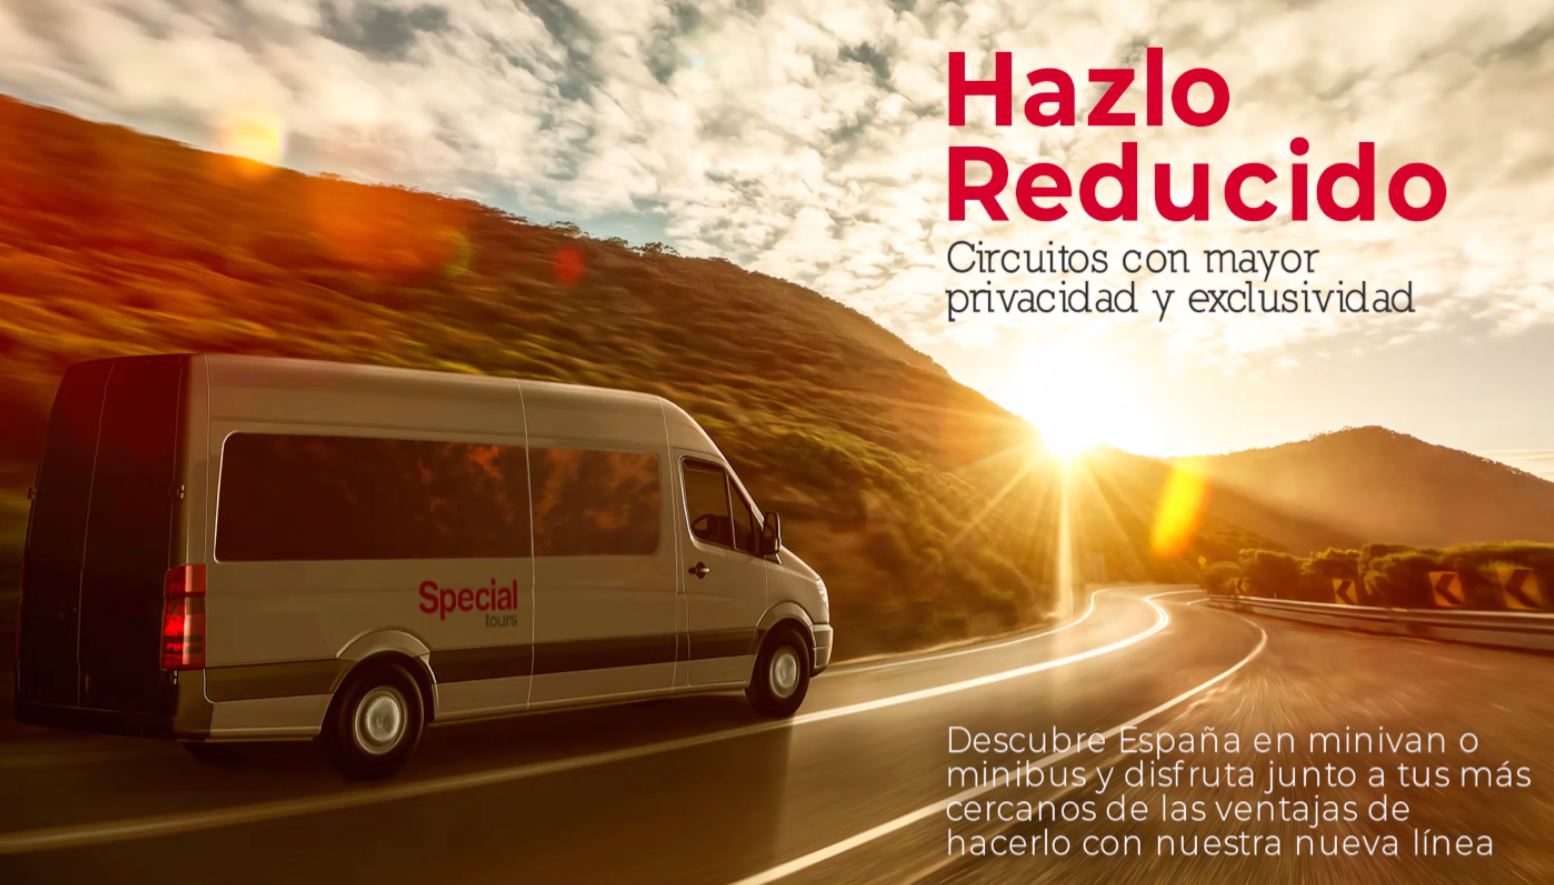 special tours opiniones